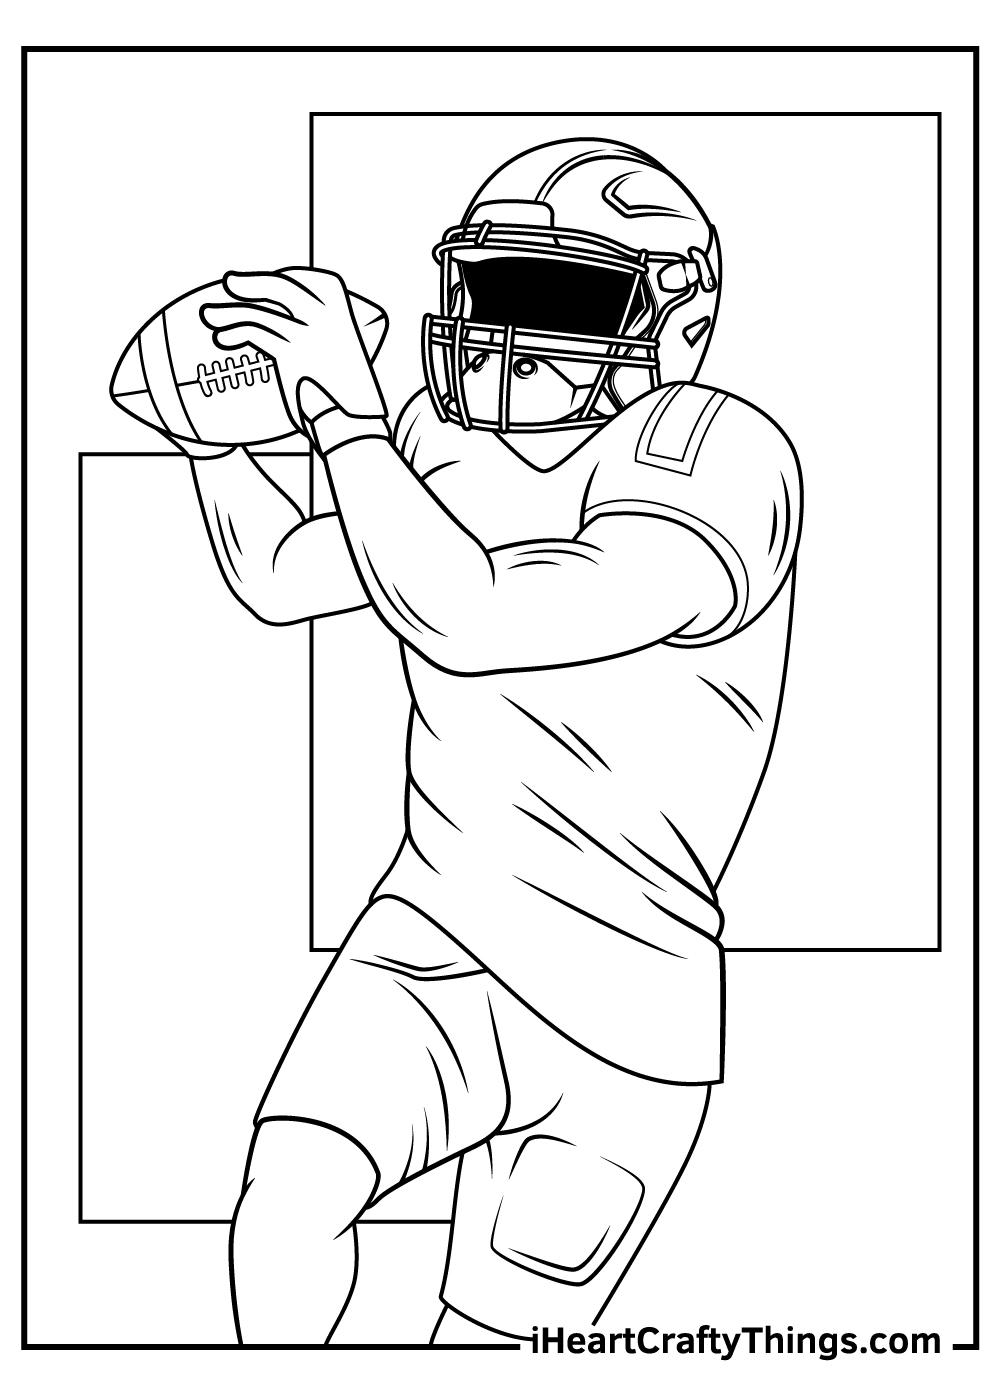 Nfl coloring pages updated